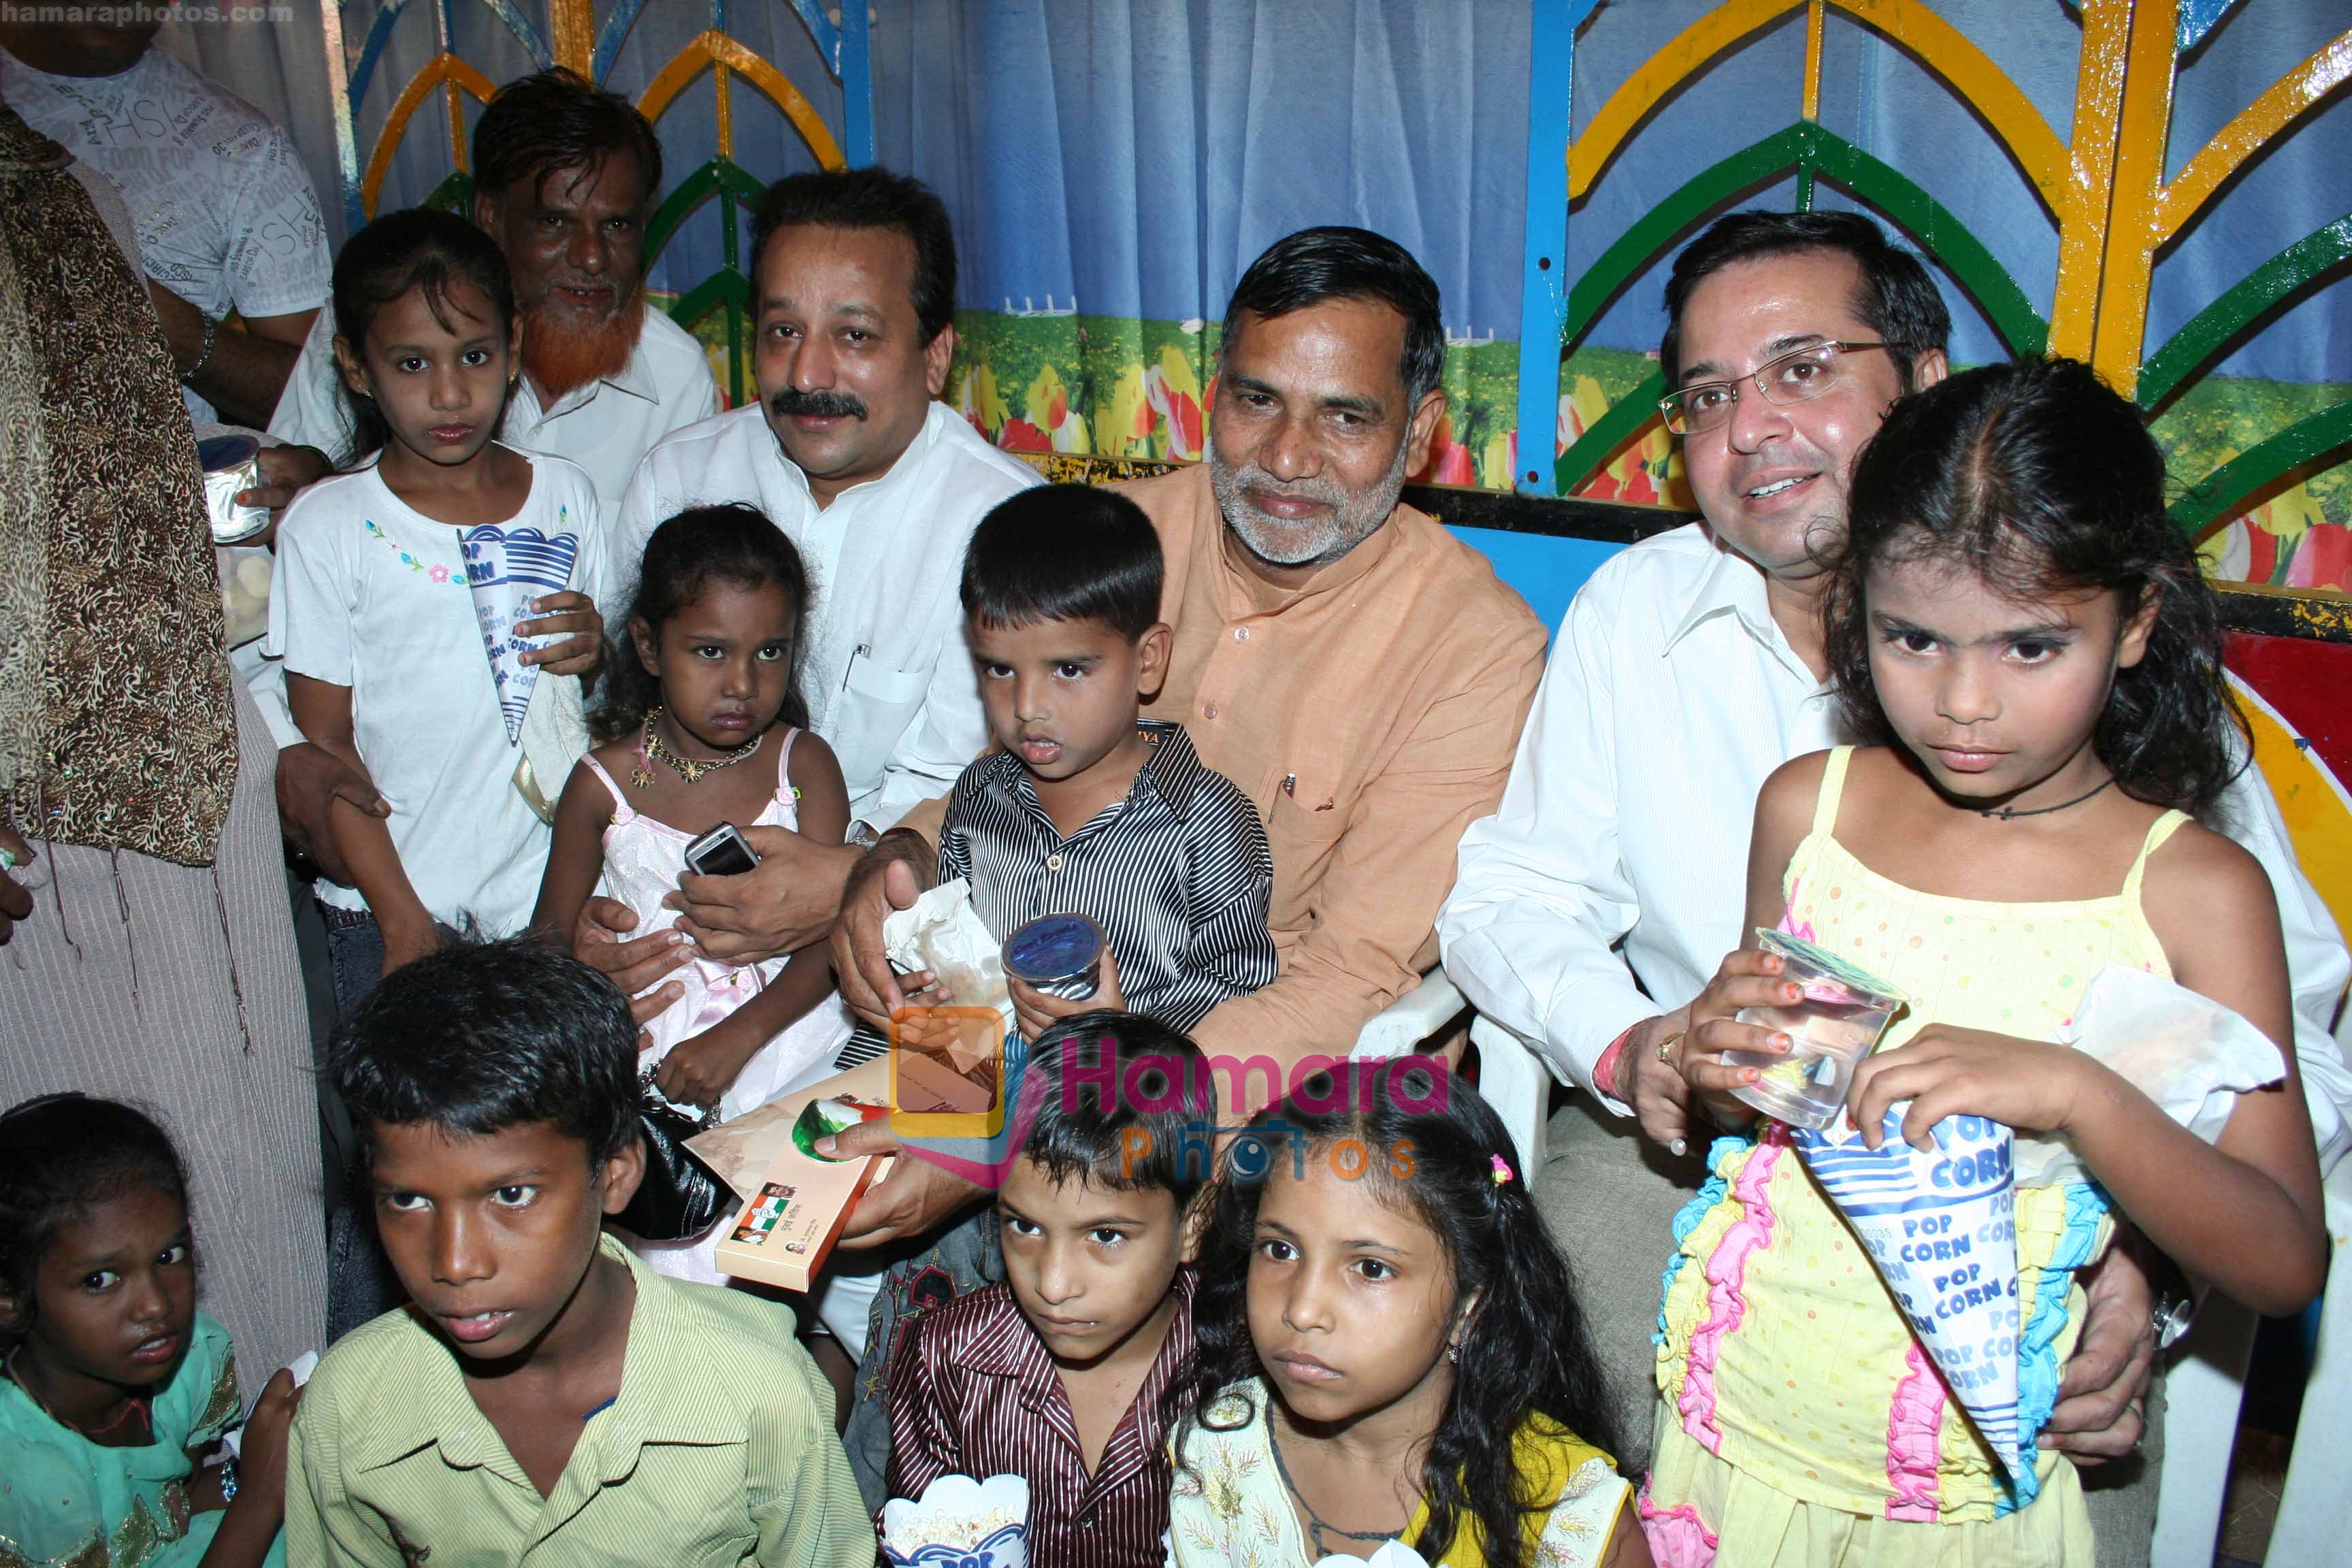  at childrens day event in rambo circus, bandra reclamation ground on 16th November 2008 